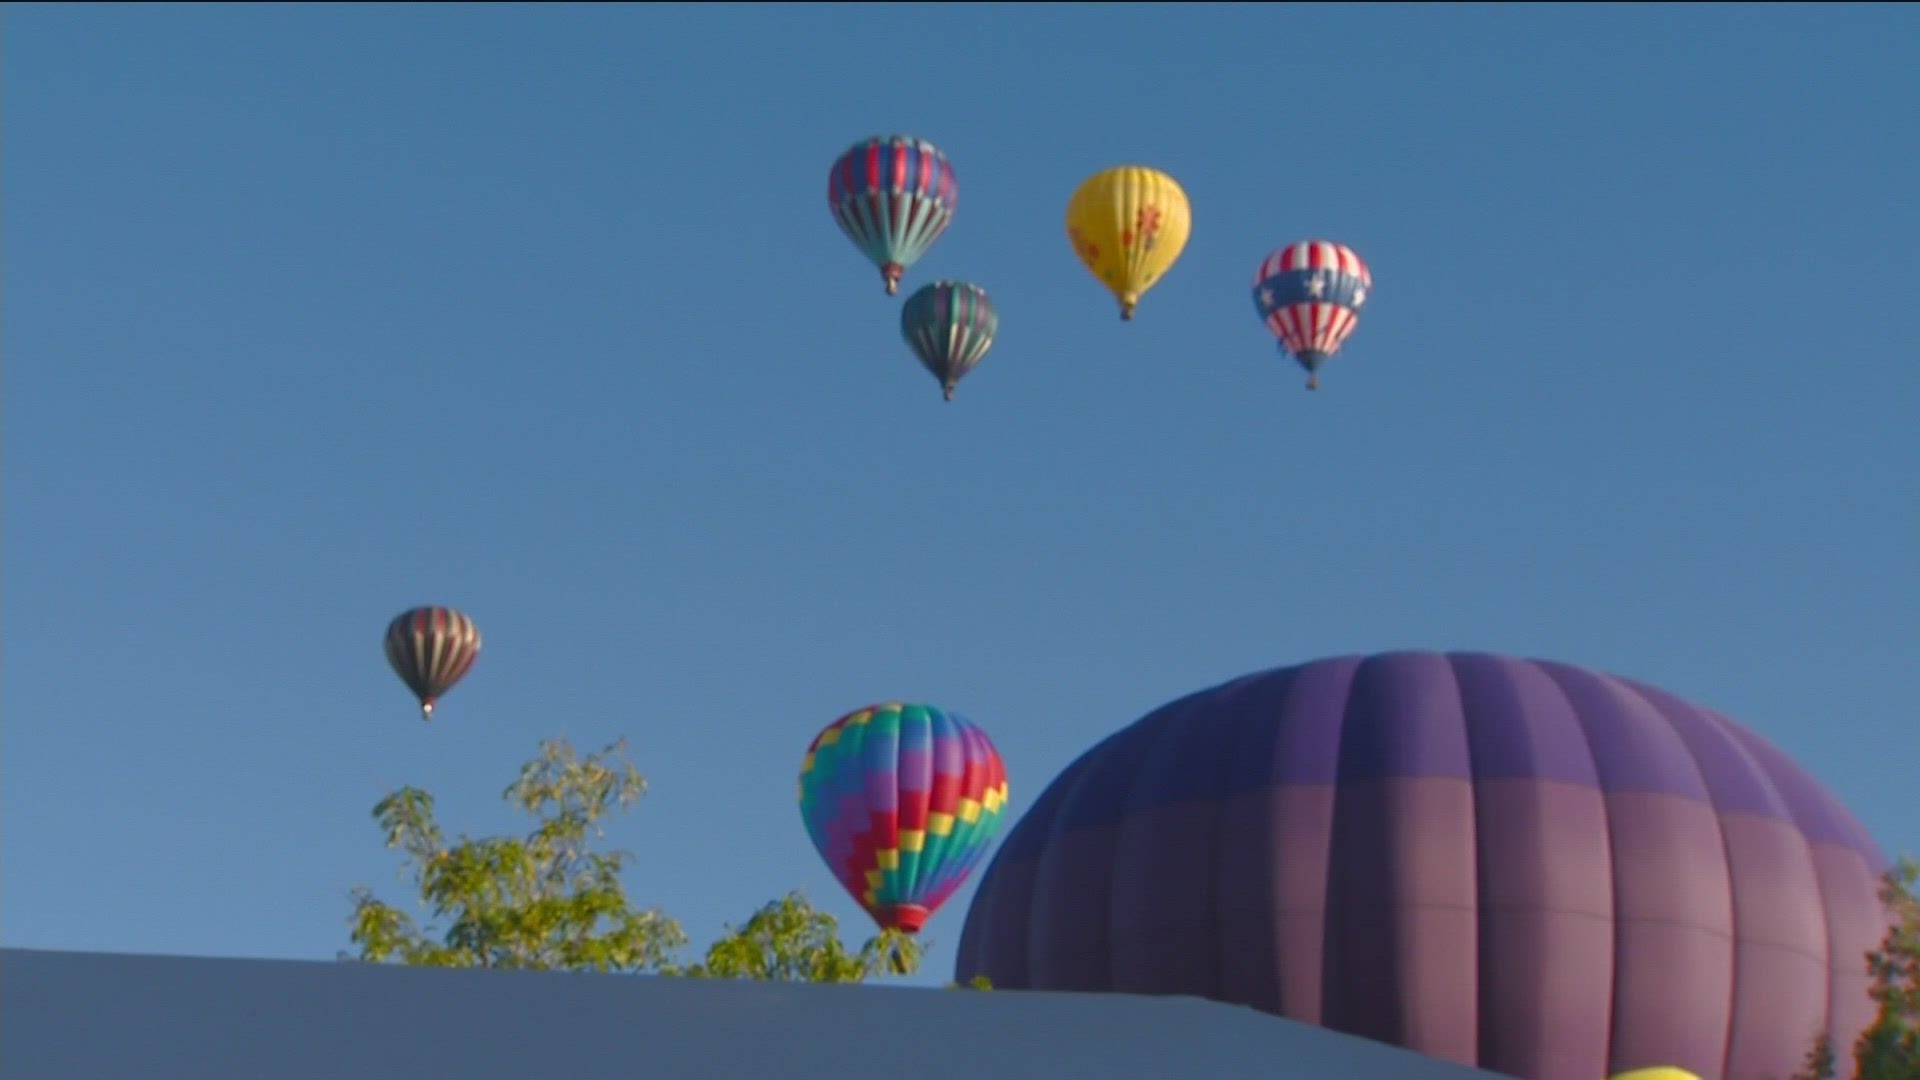 The Spirit of Boise is in its 32nd year of sending hot air balloons soaring over the City of Trees.